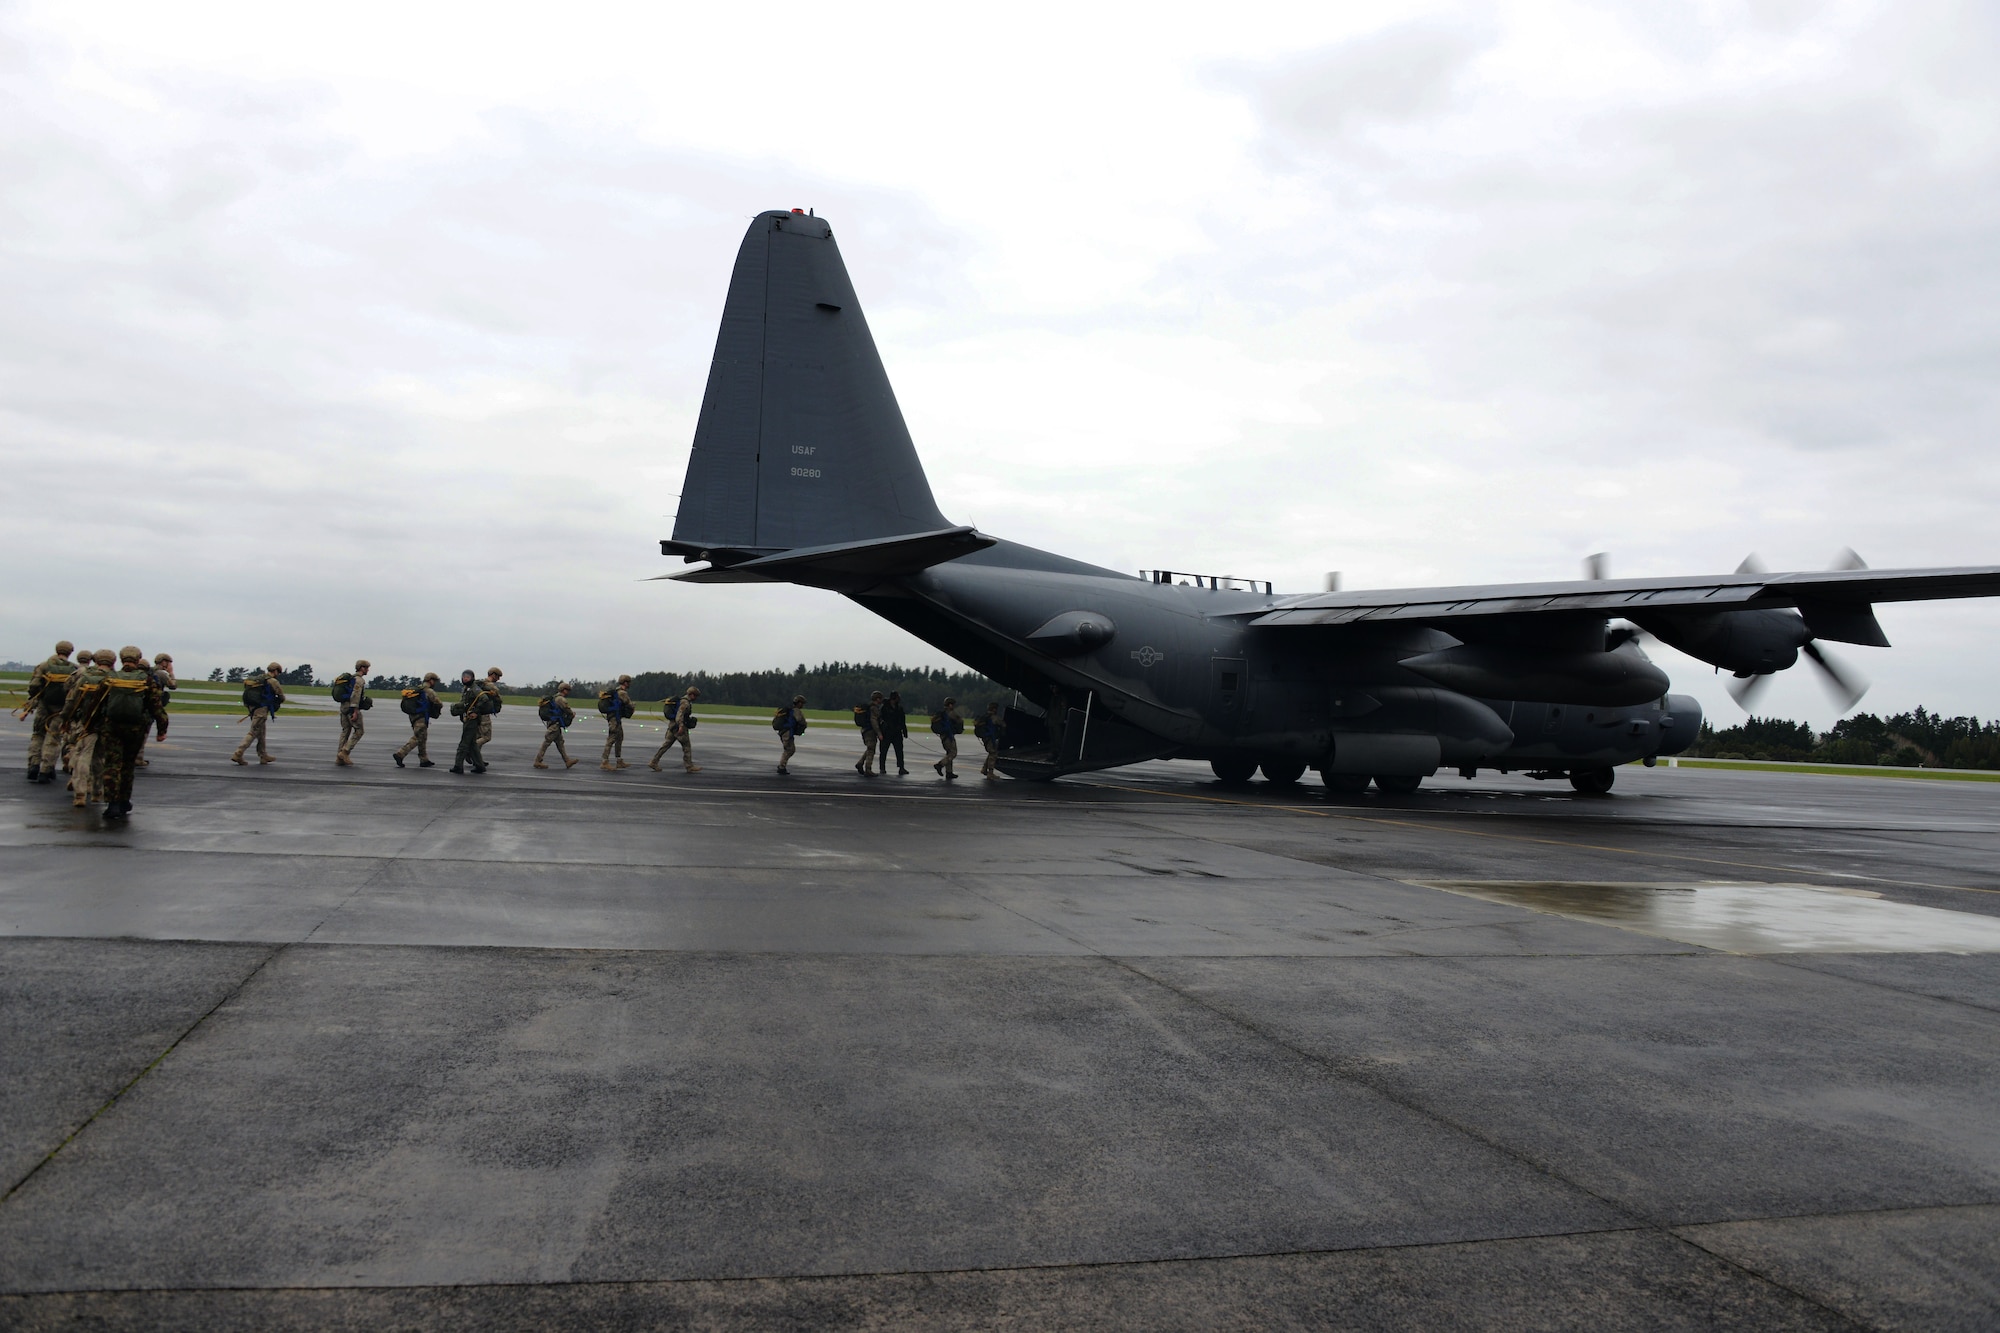 Jumpers from the Royal New Zealand Parachute Training and Support Unit load an MC-130H Combat Talon II June 20, 2016 at Royal New Zealand Air Force Base Auckland.  The jumpers were completing their initial parachutist training.  (U.S. Air Force photo by Master Sgt. Kristine Dreyer)